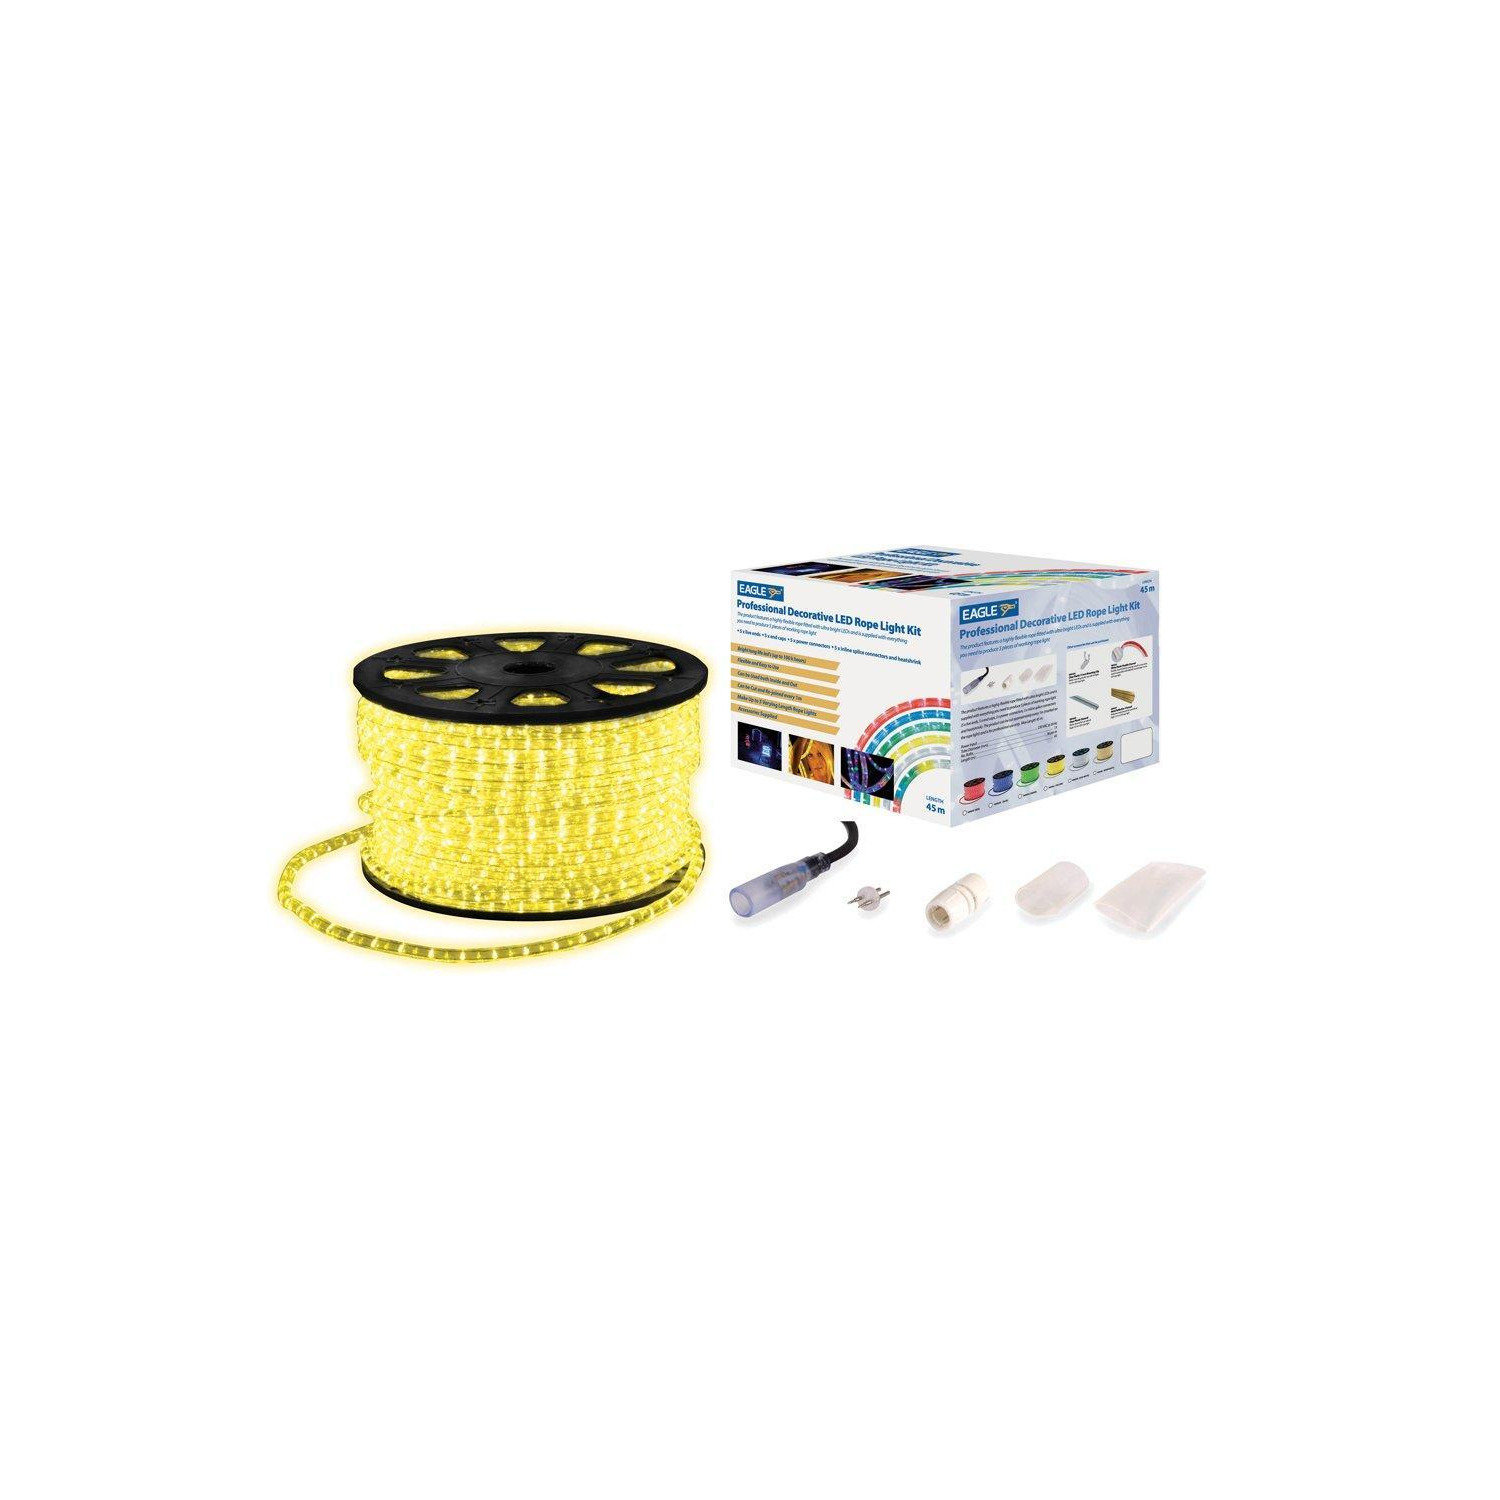 Static LED Rope Light Kit With Wiring Accessories Kit 45m Yellow - image 1